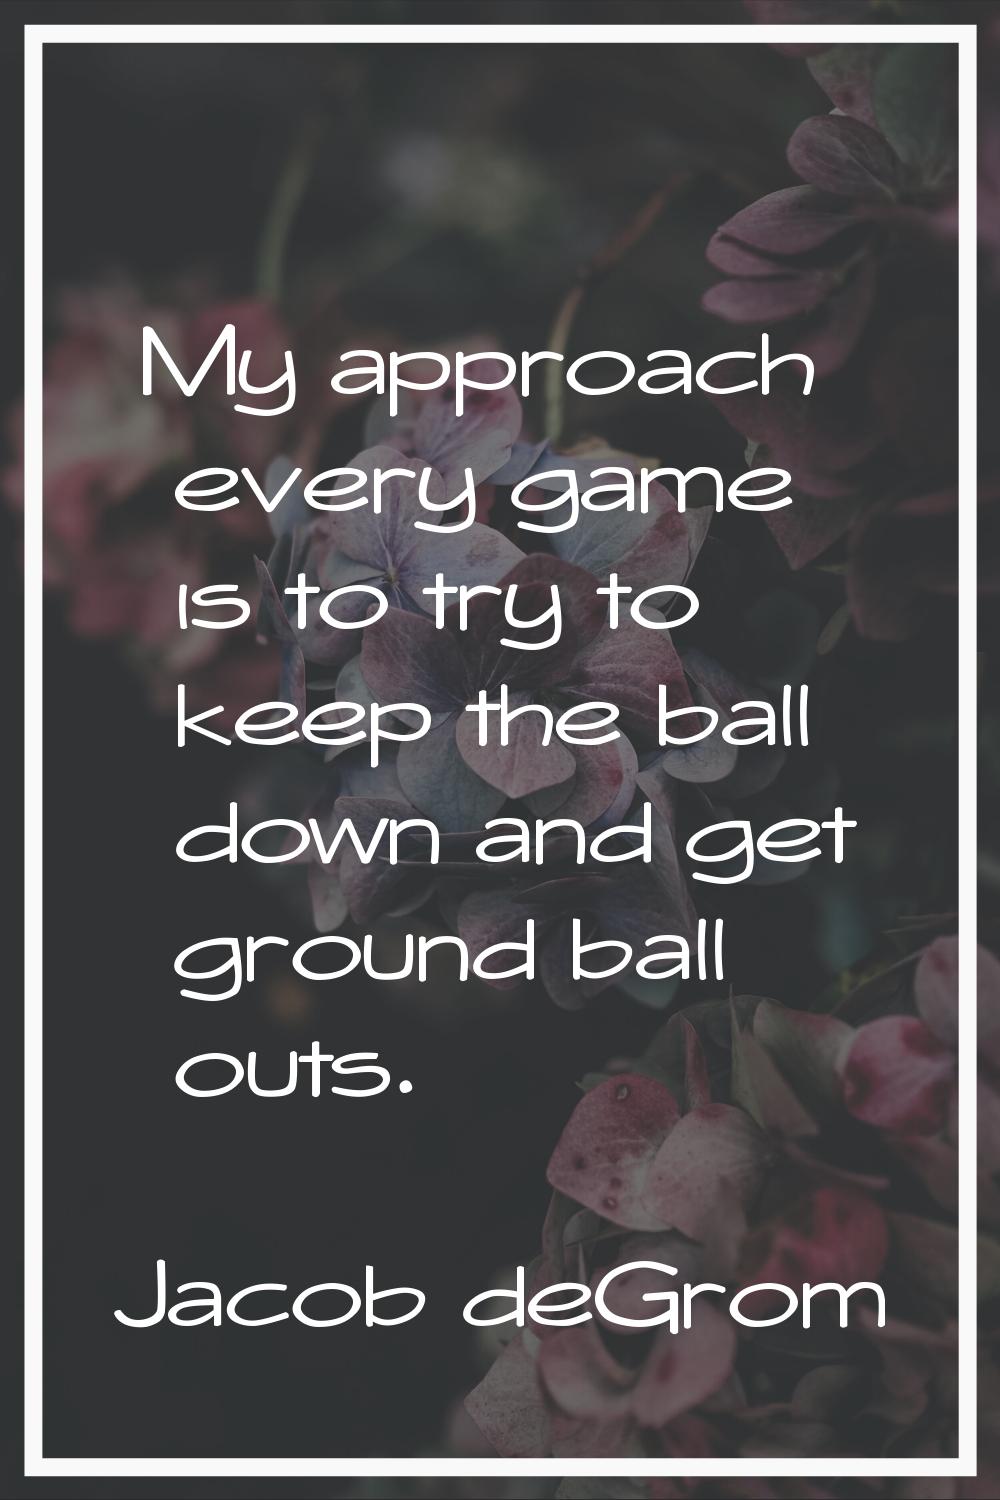 My approach every game is to try to keep the ball down and get ground ball outs.